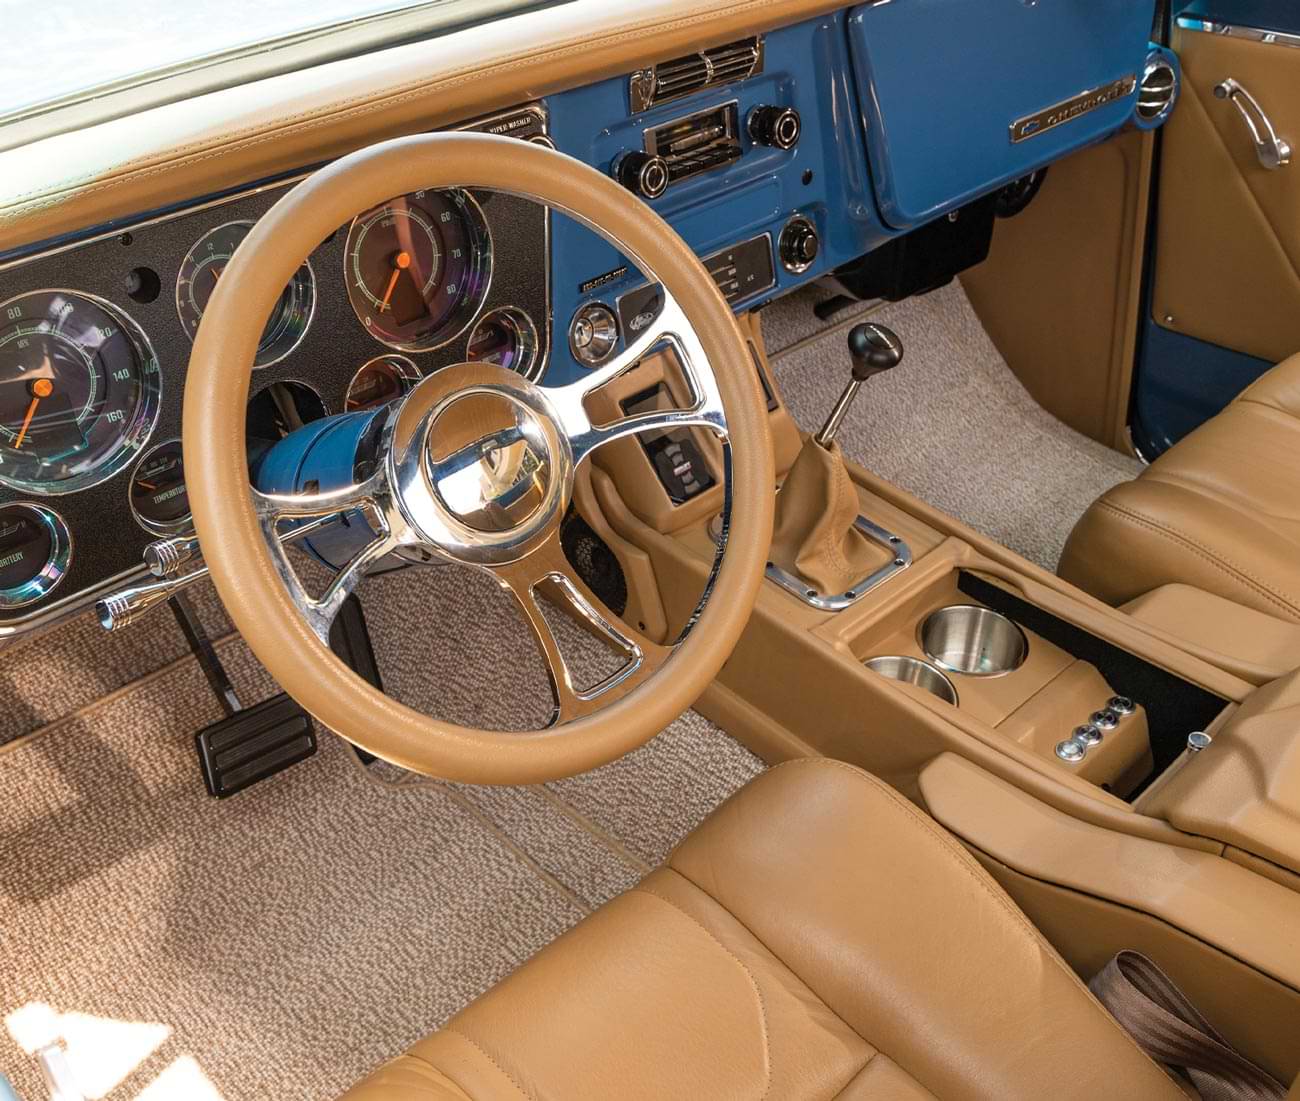 wide view of the drivers dashboard including the steering, gauges, pedals, radio and center console